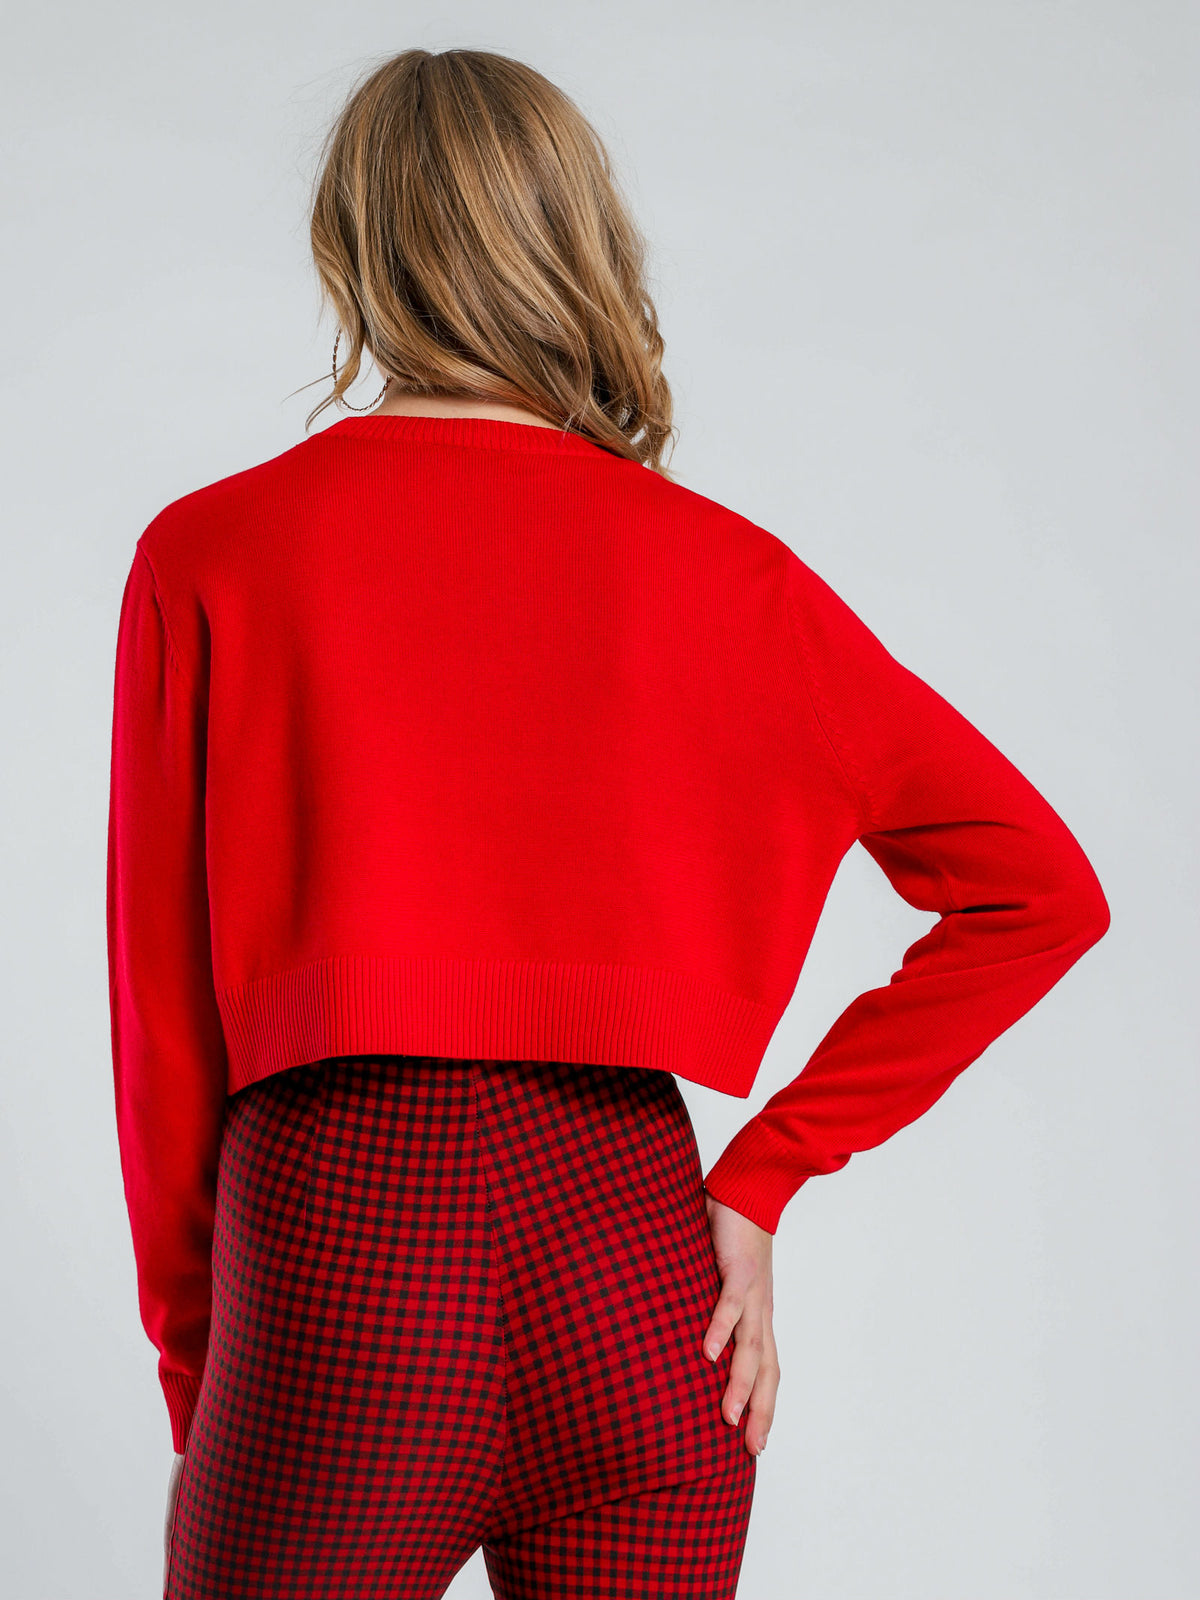 Lonely Hearts Knit Jumper in Red